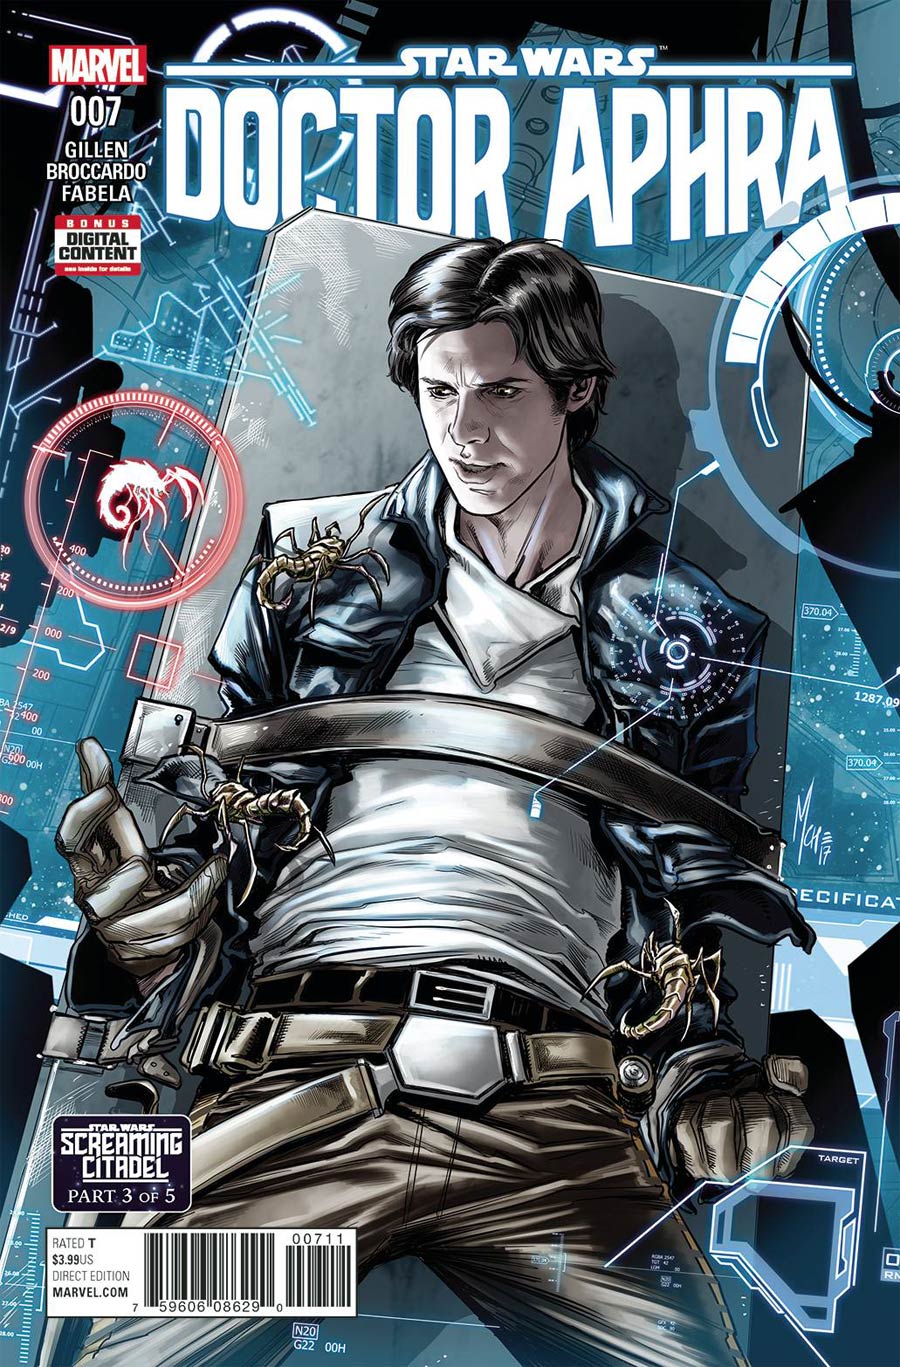 Star Wars Doctor Aphra #7 Cover A Regular Marco Checchetto Cover (Screaming Citadel Part 3)